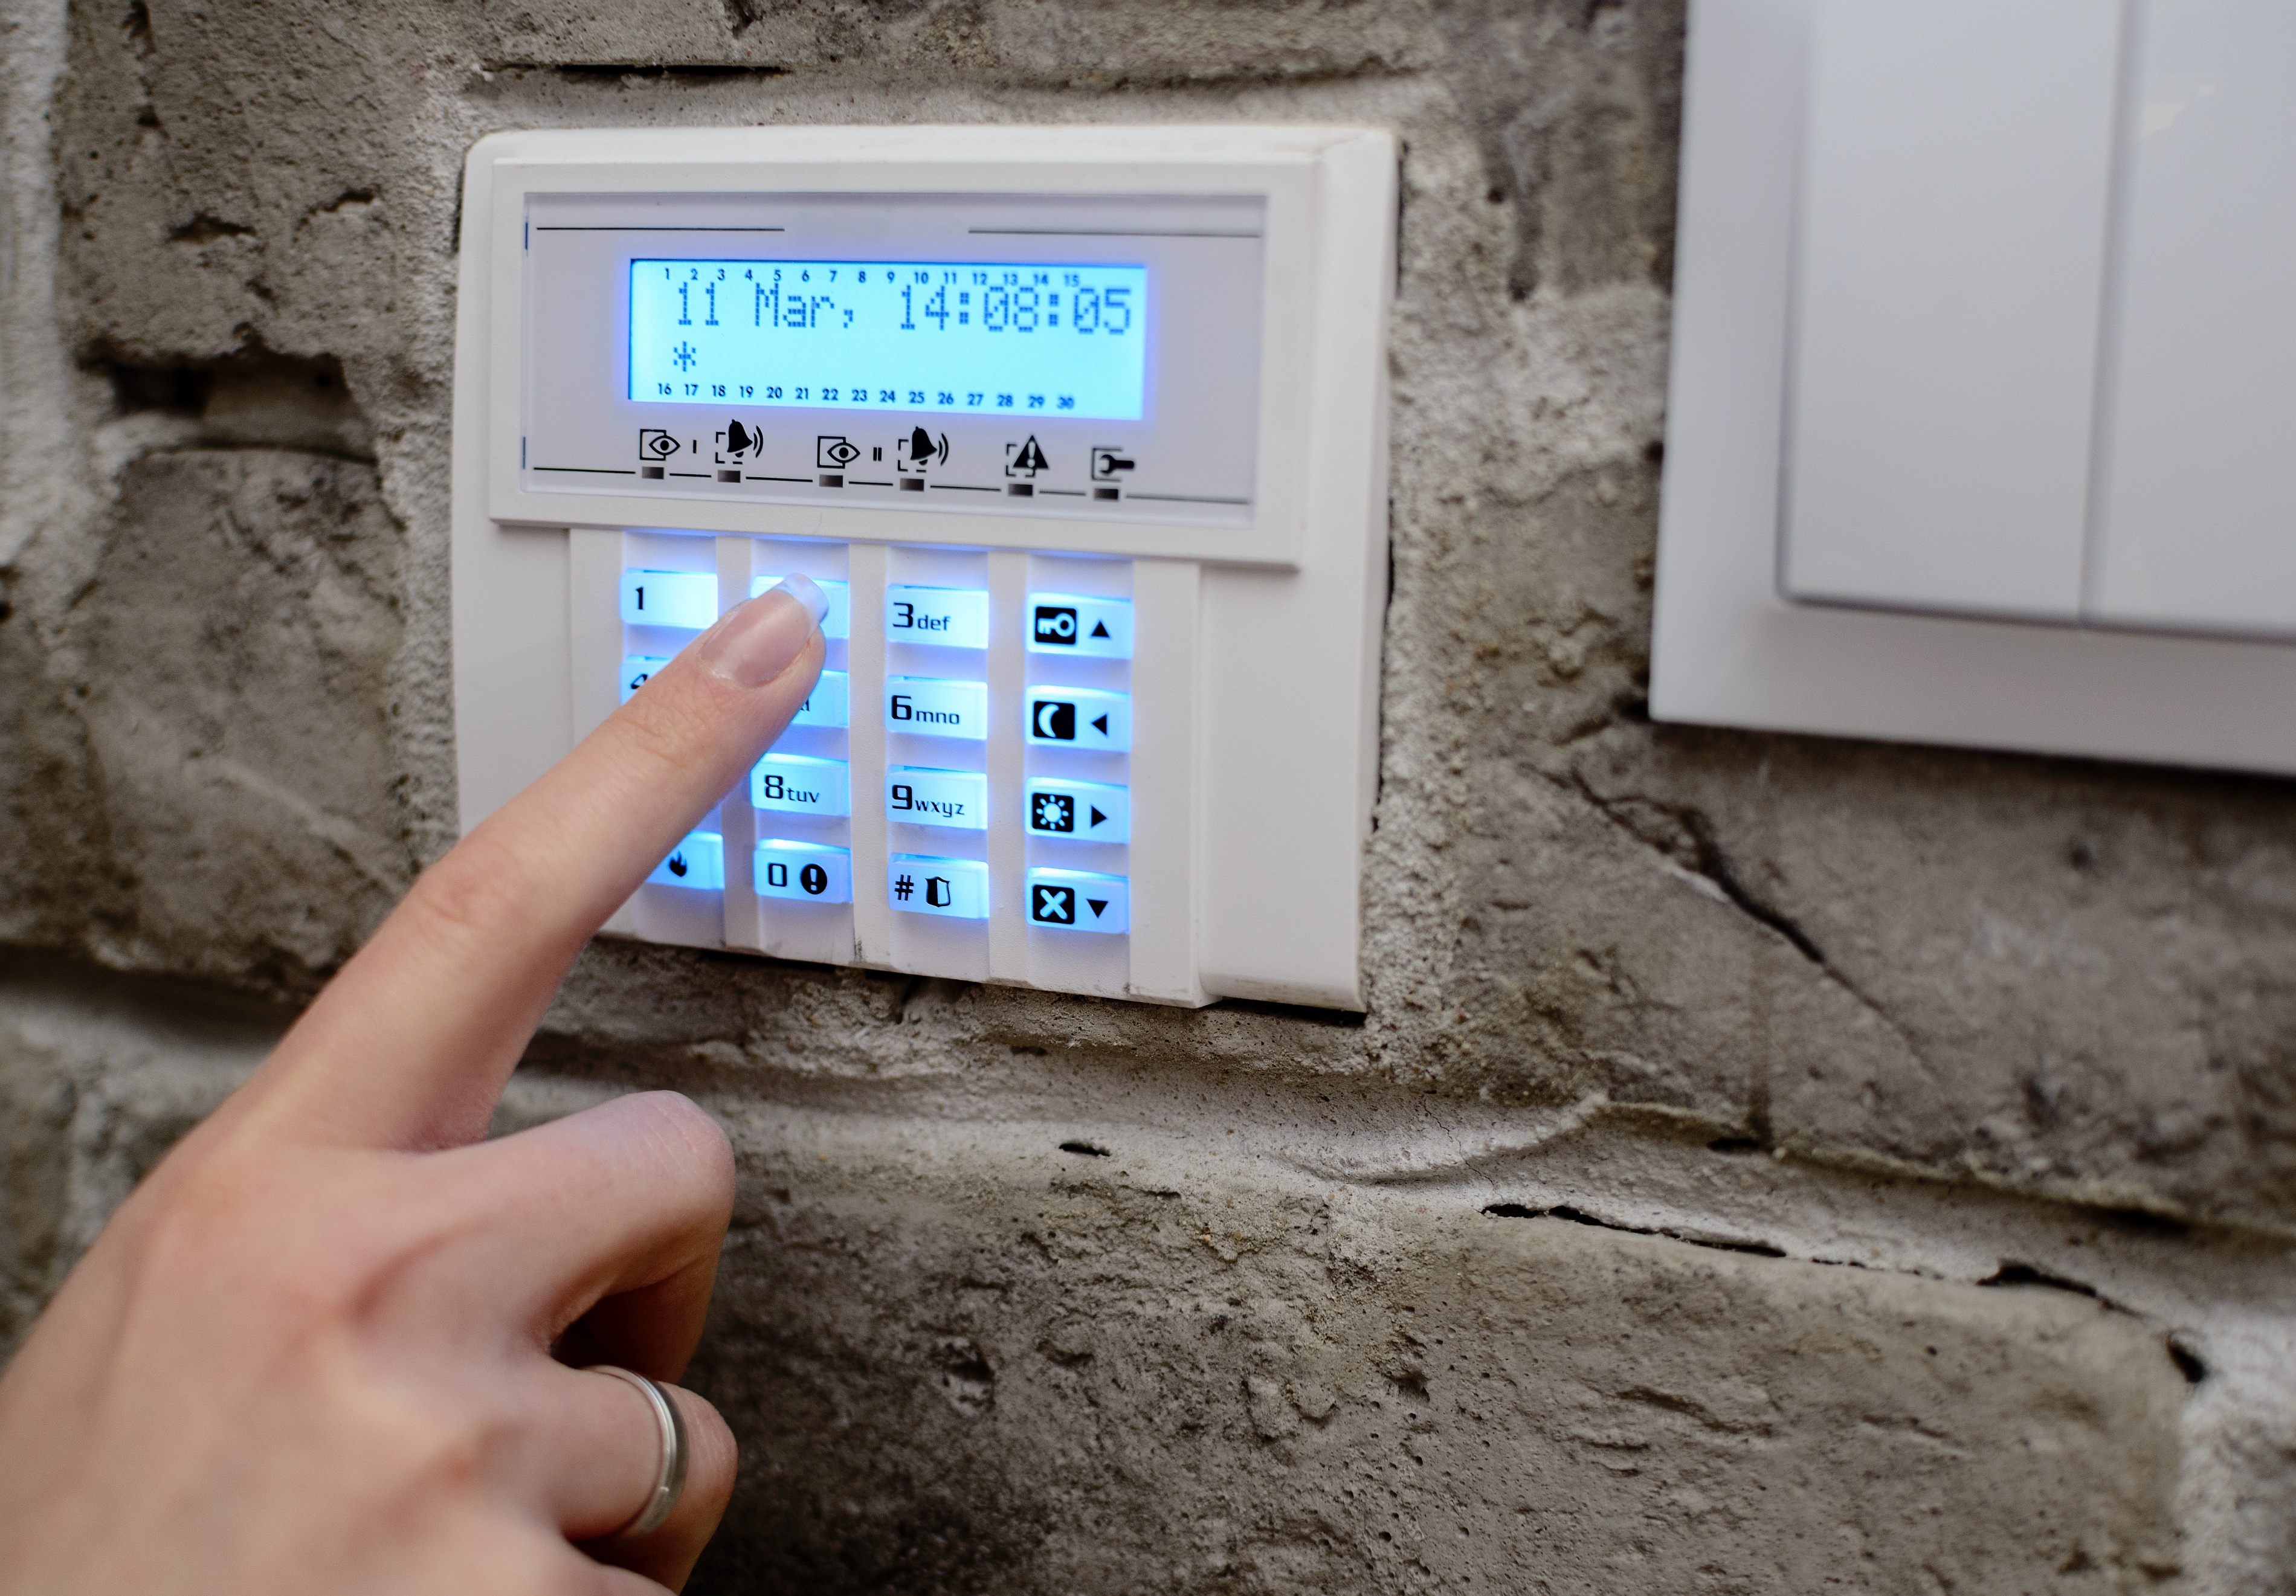 a hand pushing security alarm buttons